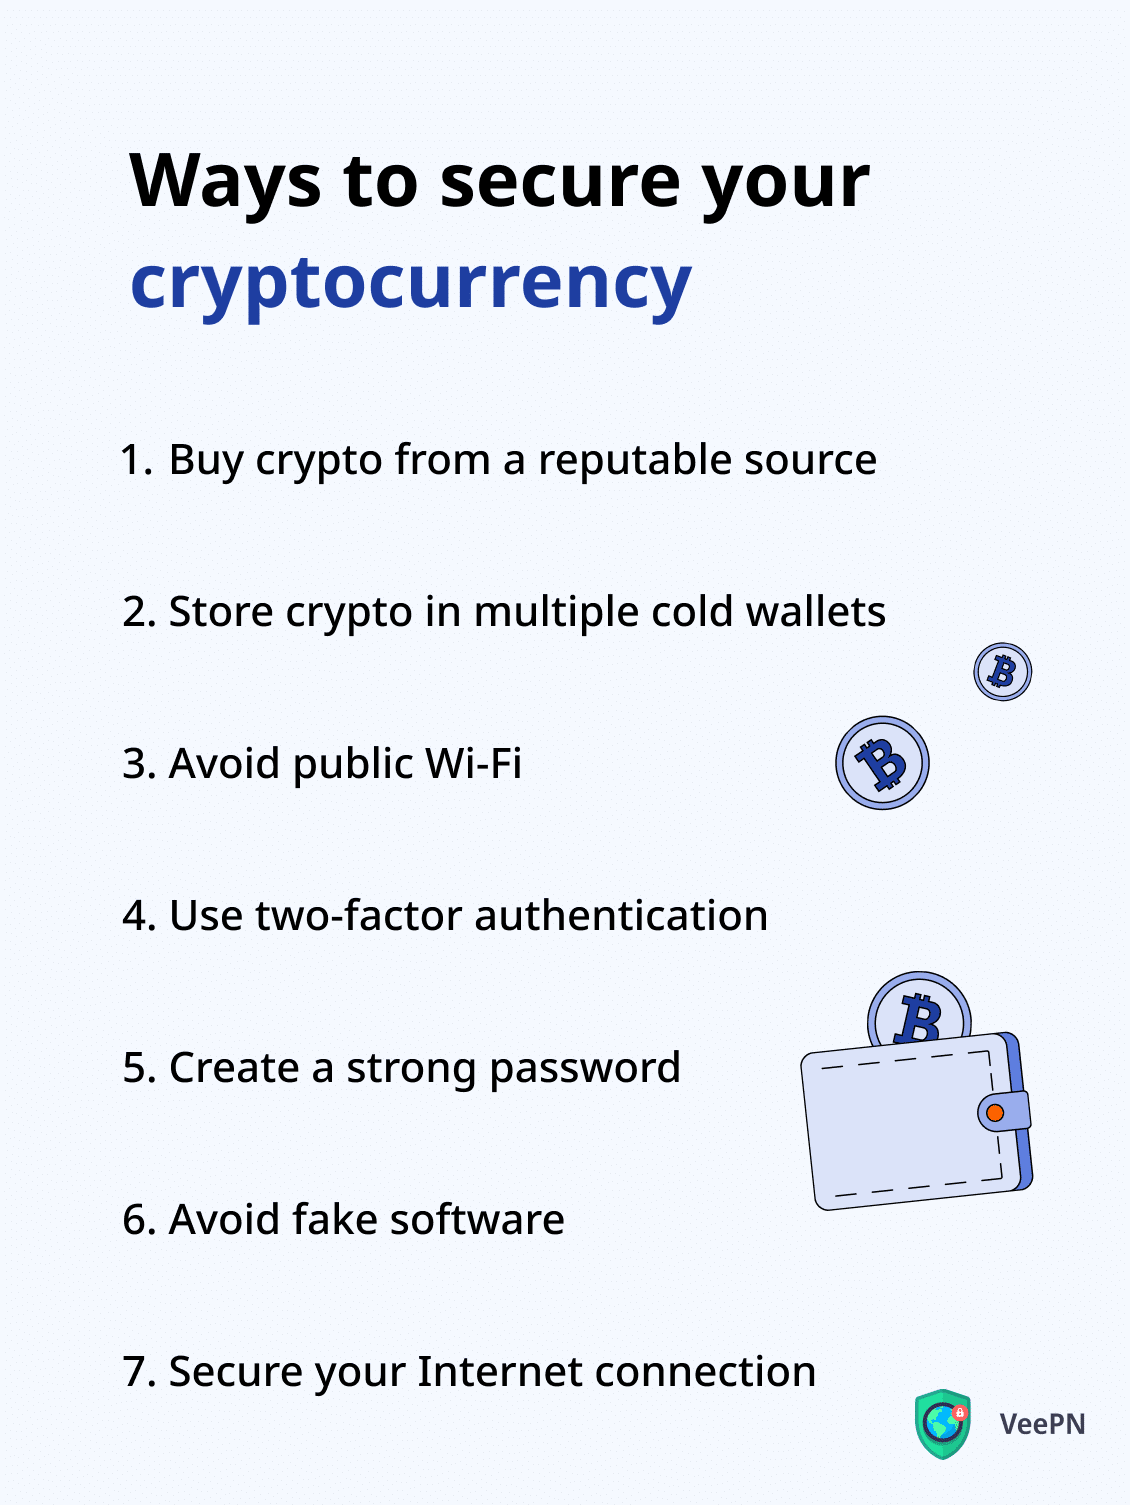 How to secure your cryptocurrency